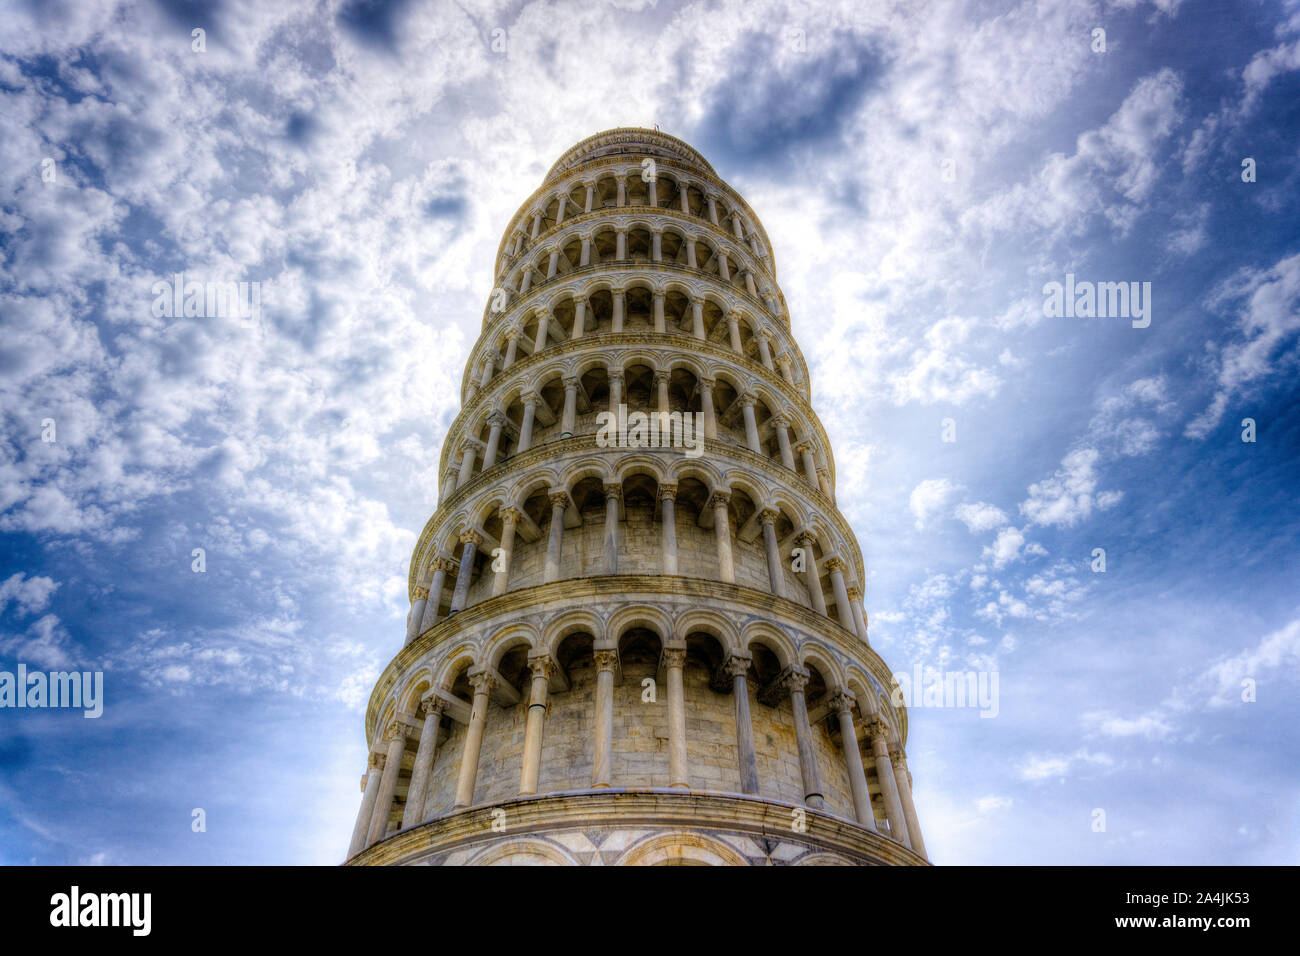 Italy, Tuscany, Pisa, the leaning tower in Piazza dei Miracoli Stock Photo